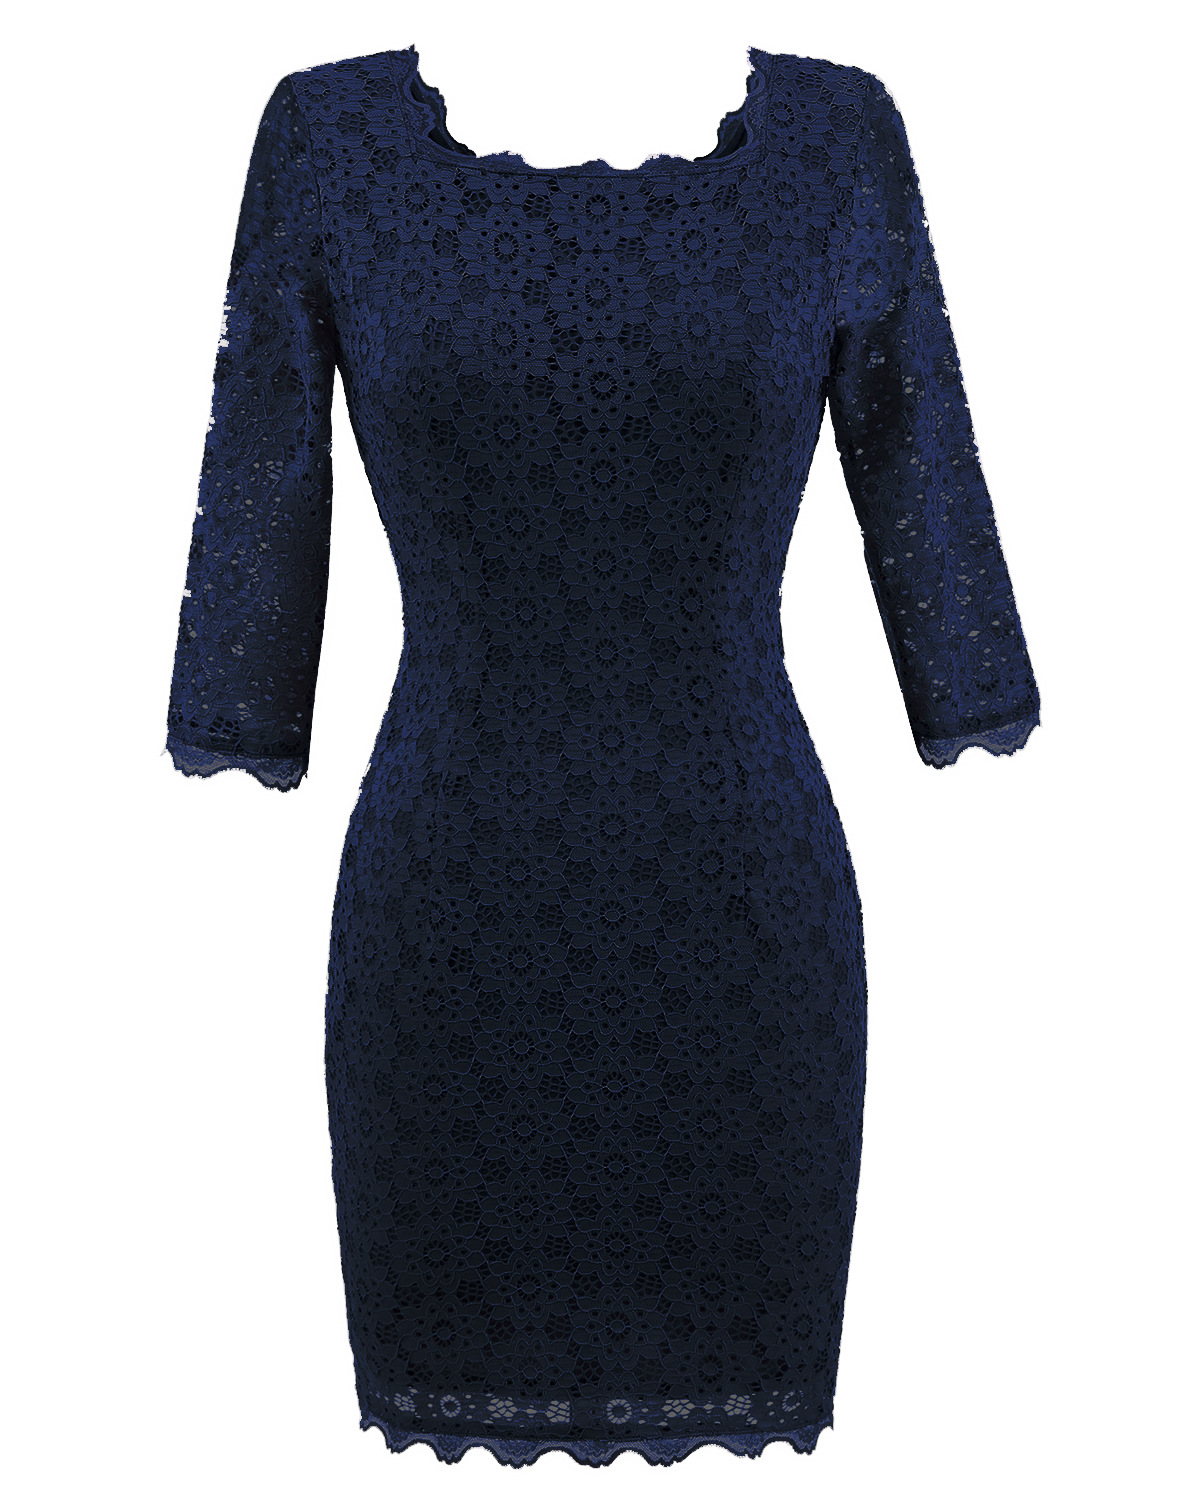 Women's Vintage Square Collar 2/3 Sleeve Floral Lace Sheath Bodycon Dresses - Navy Blue